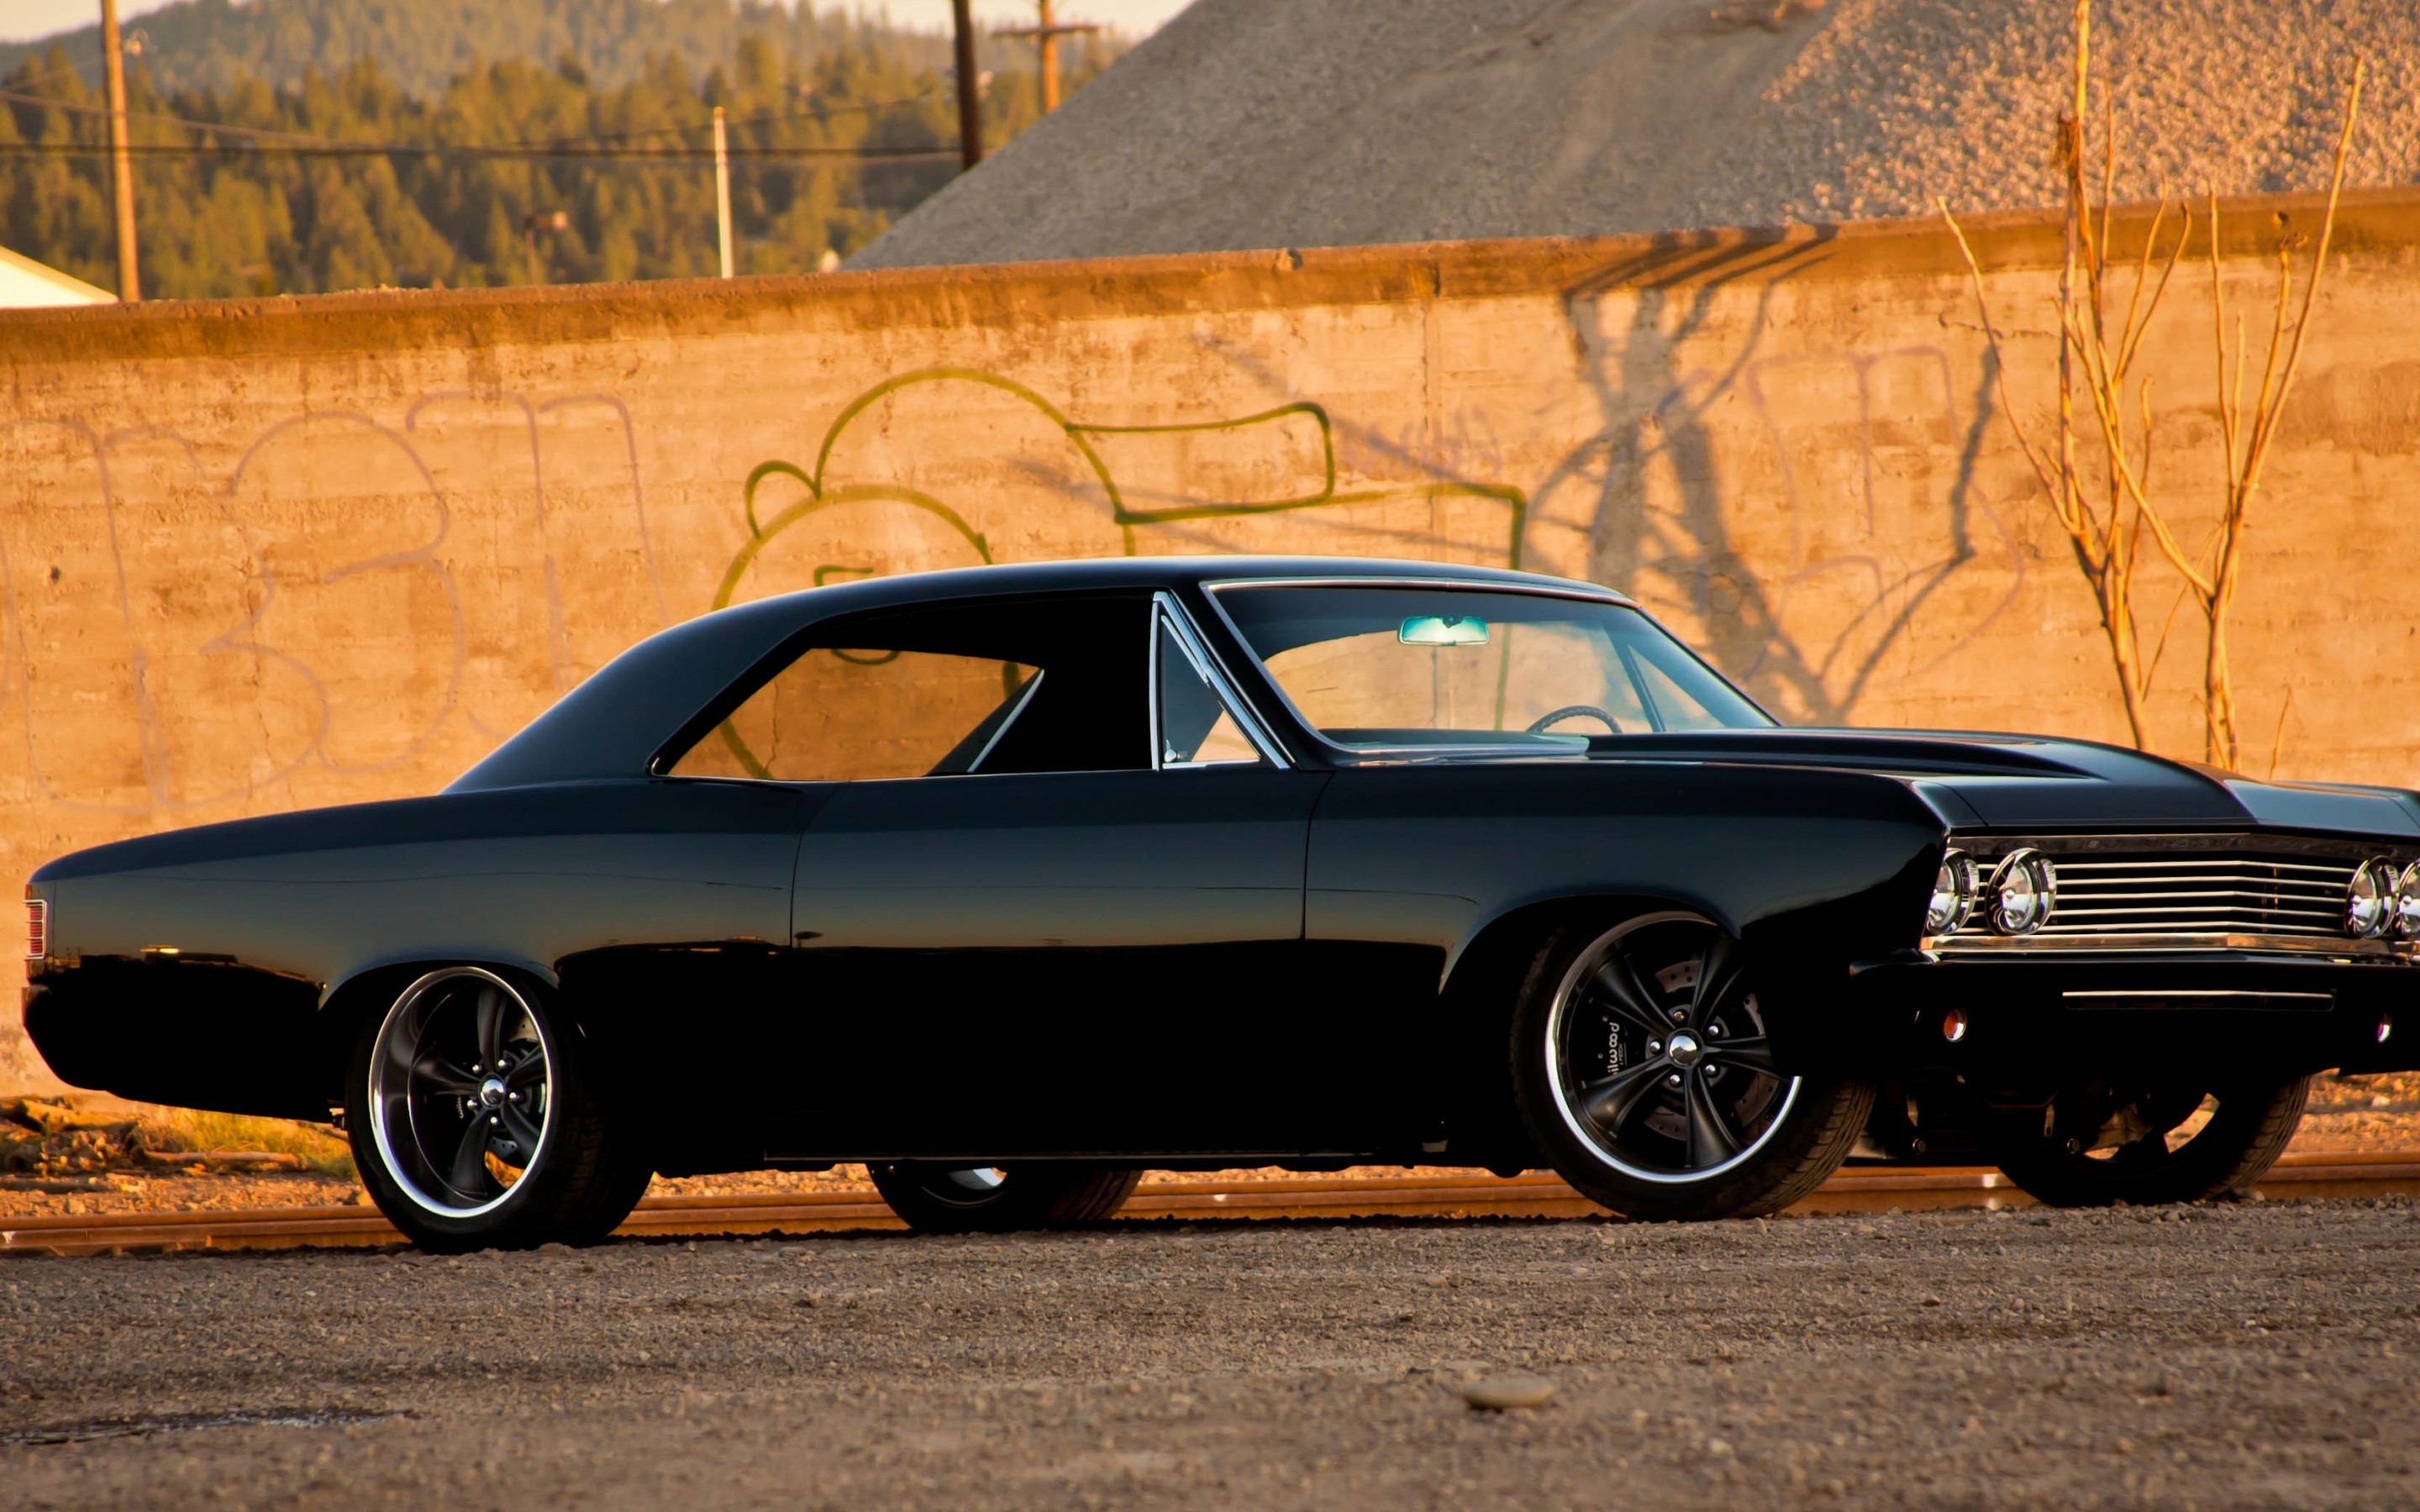 2880x1800 Chevrolet Chevelle SS vehicles cars auto retro classic muscle tuning hot  rod wheels stance black wallpaper